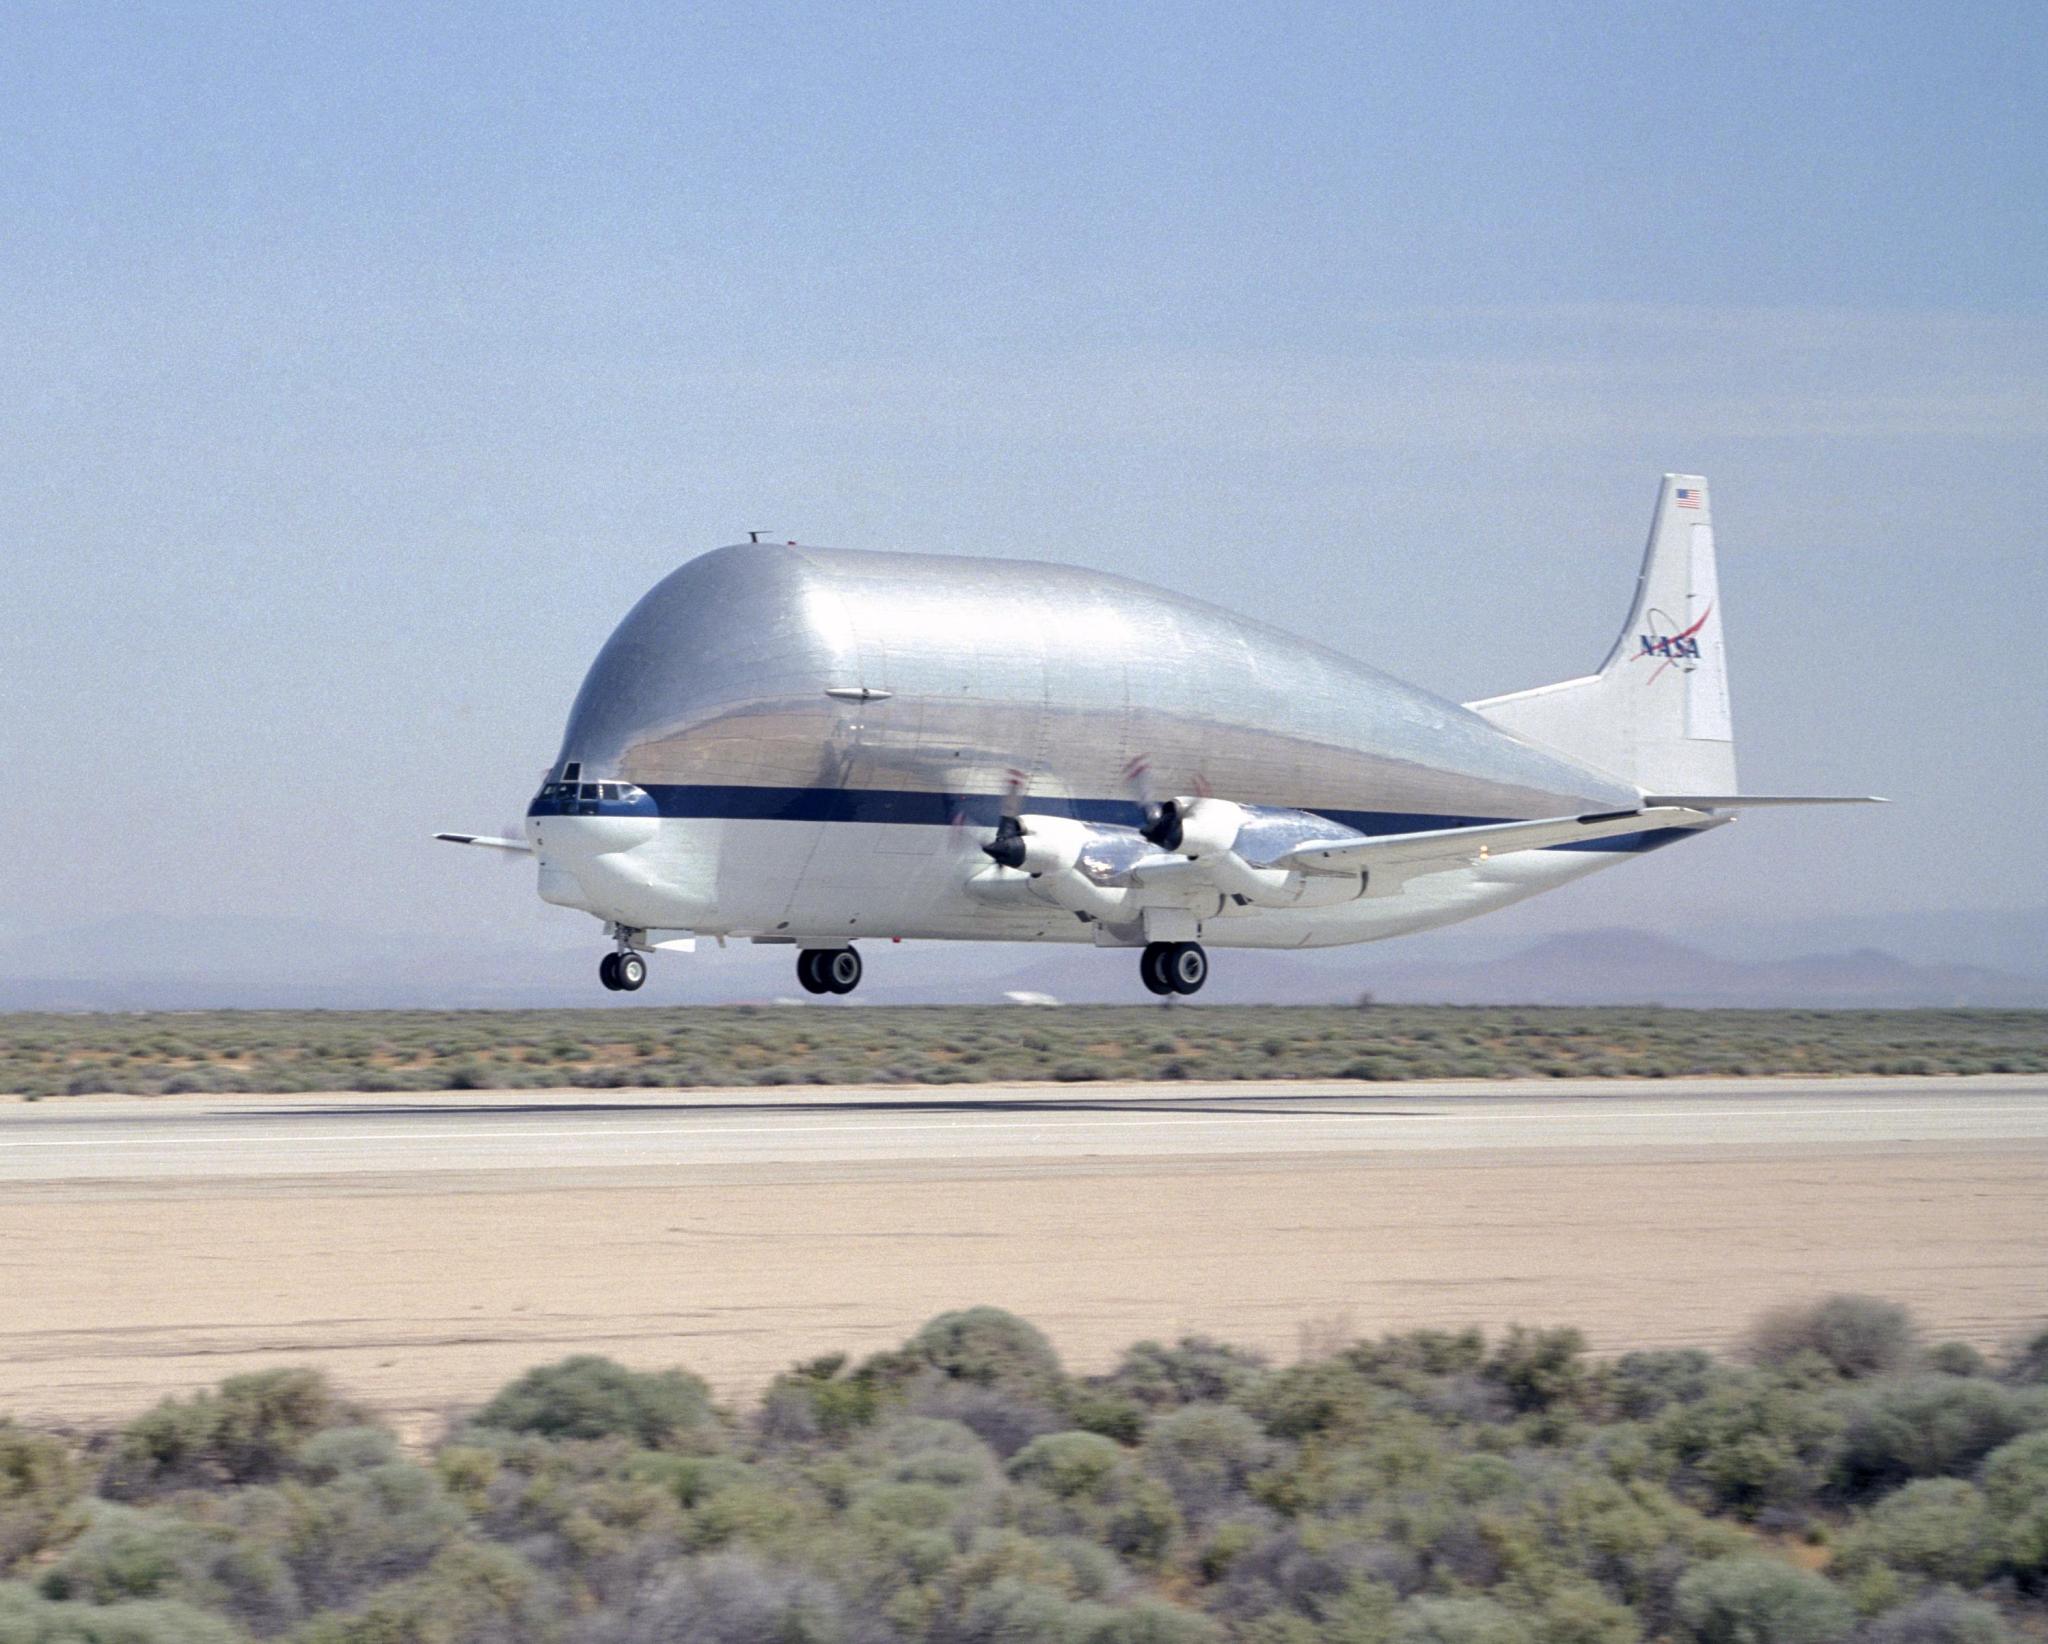 The Super Guppy is set to land at NASA's Langley Research Center Dec. 11, 2014.